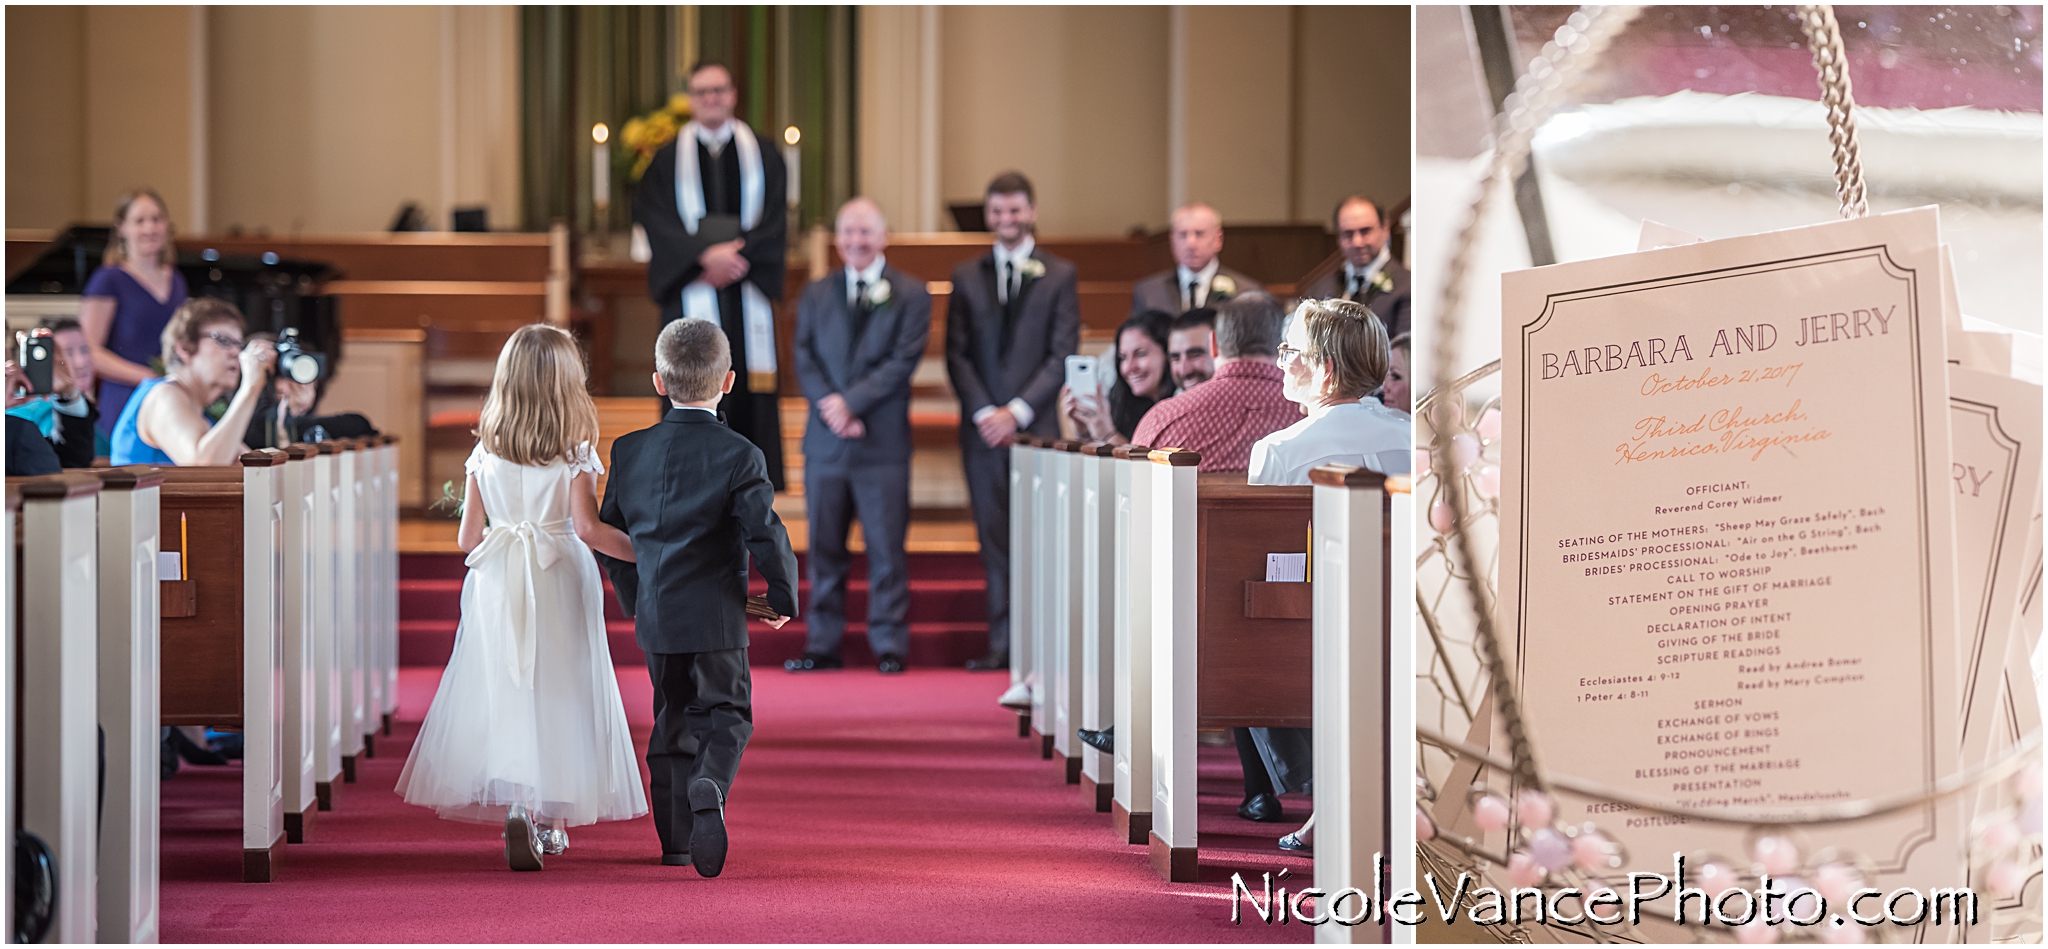 The flower girl and ring bearer proceed down the aisle at Third Church Presbyterian.